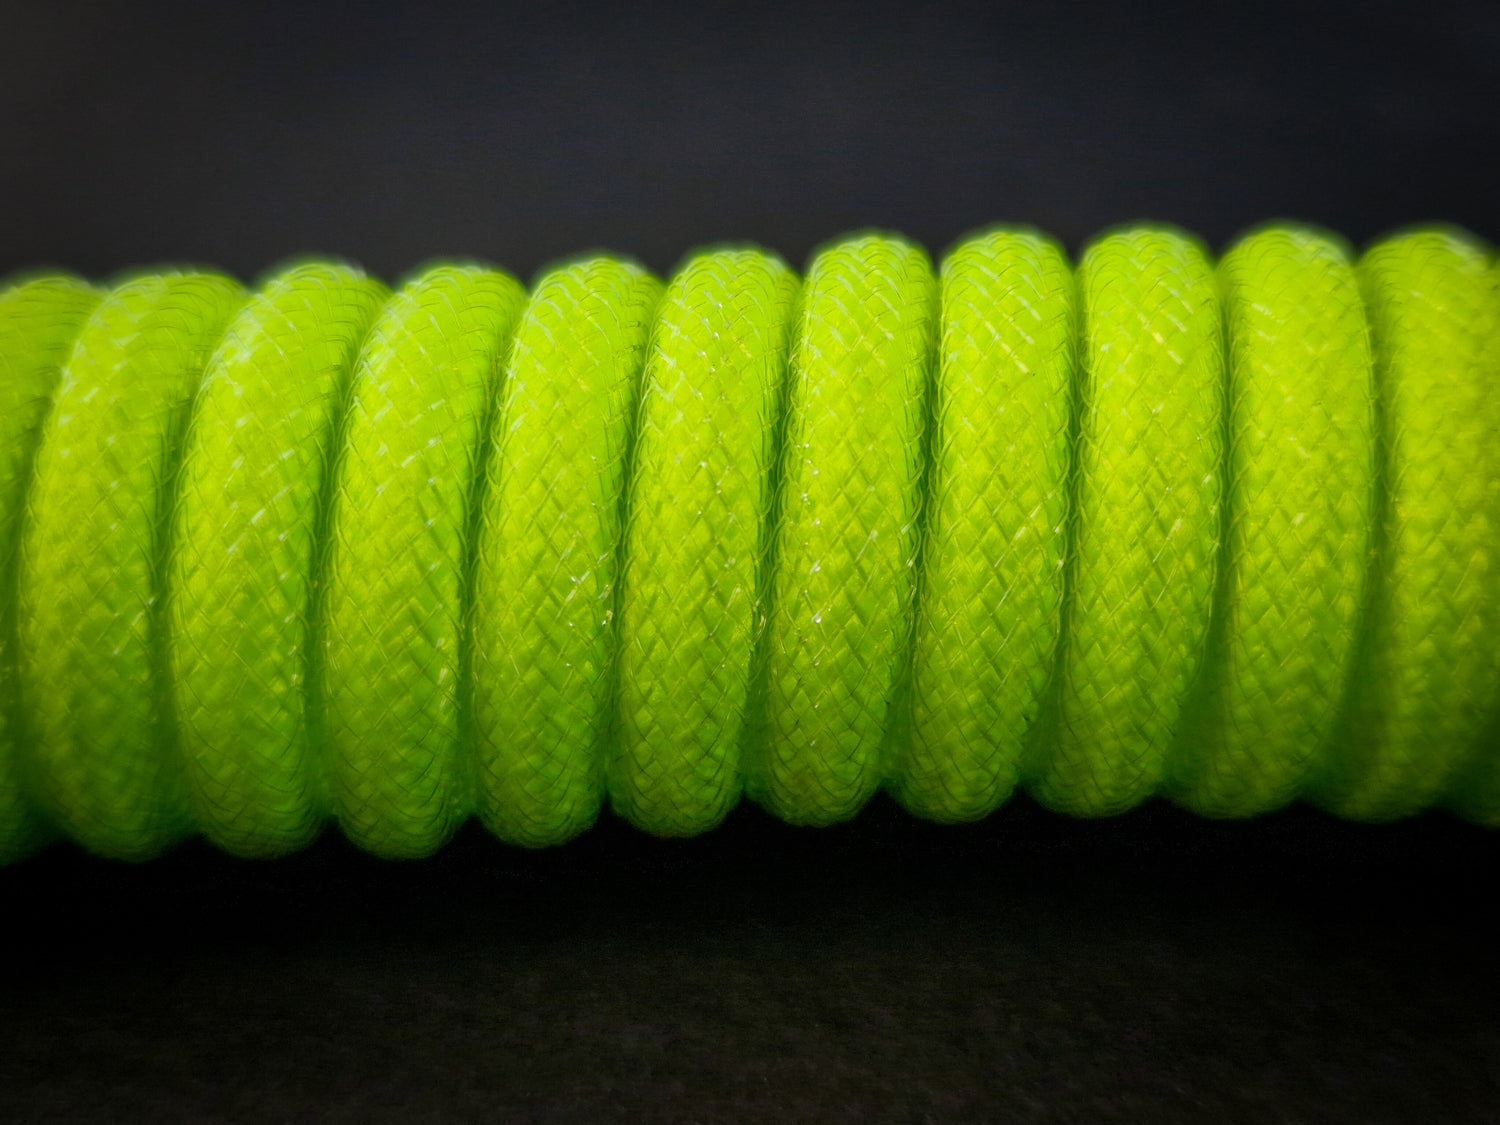 Neon Yellow Coiled Aviator Cable